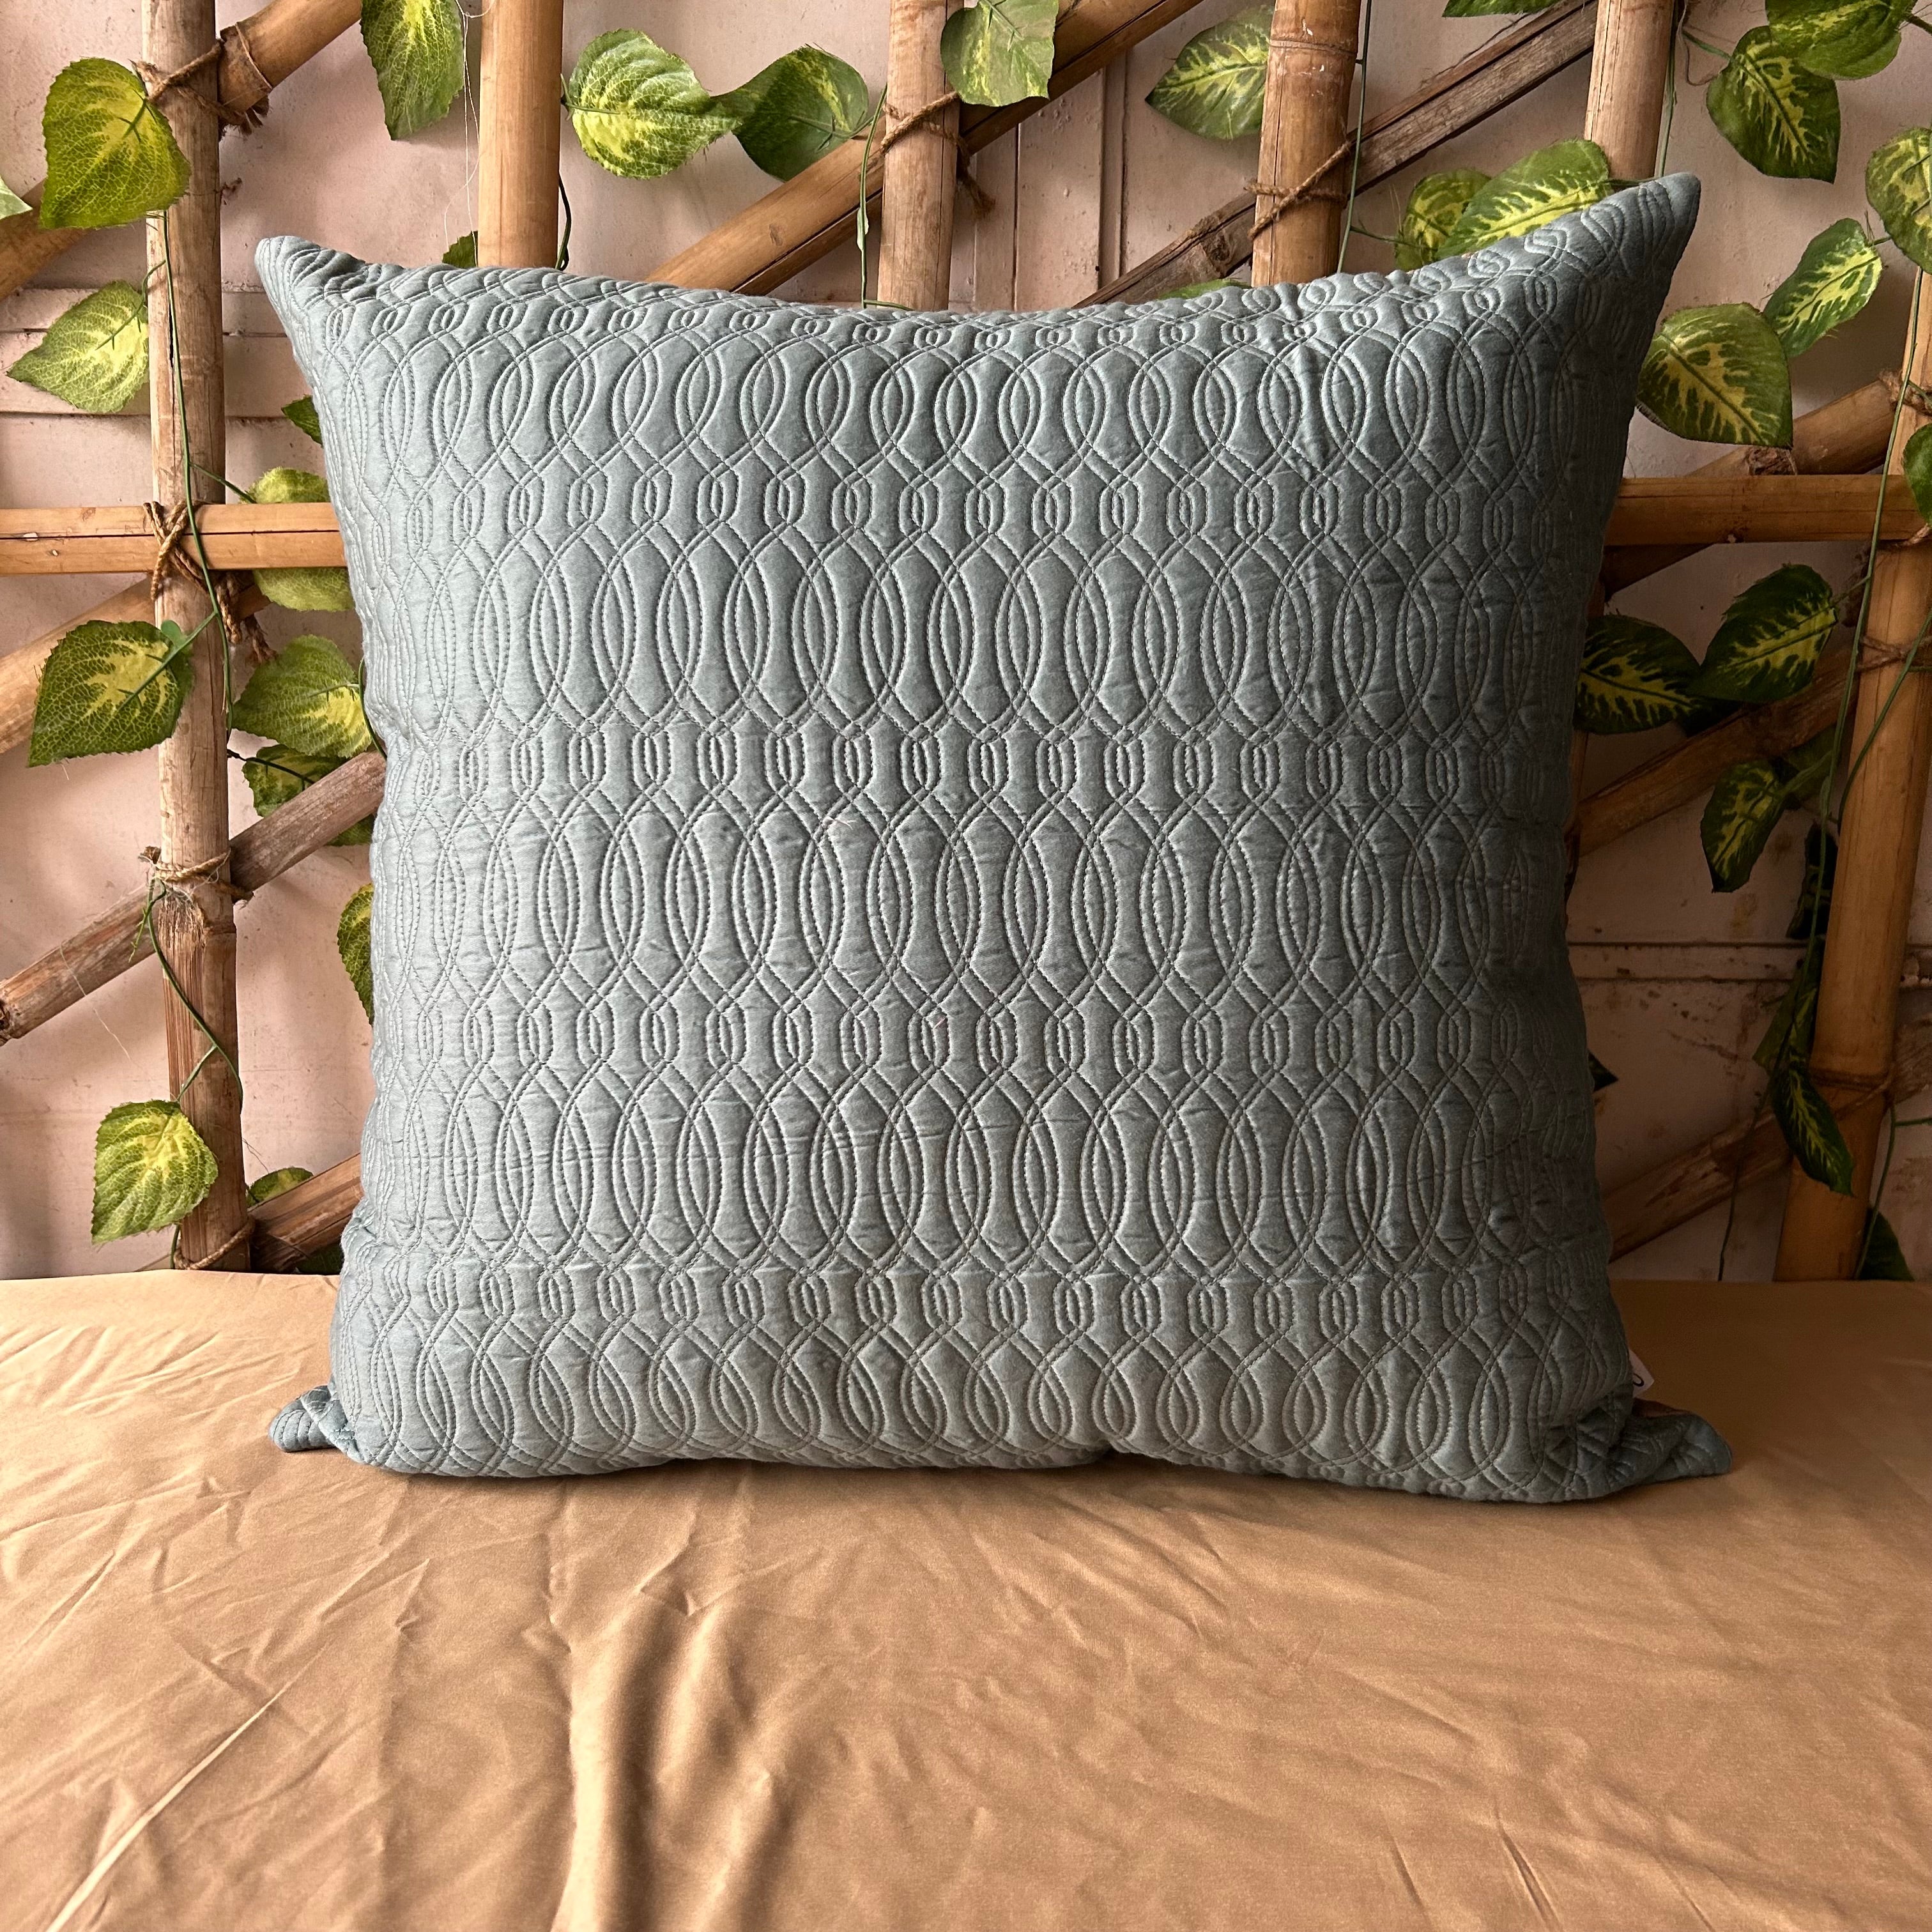 Teal Quilted Reversible Cotton Euro Sham